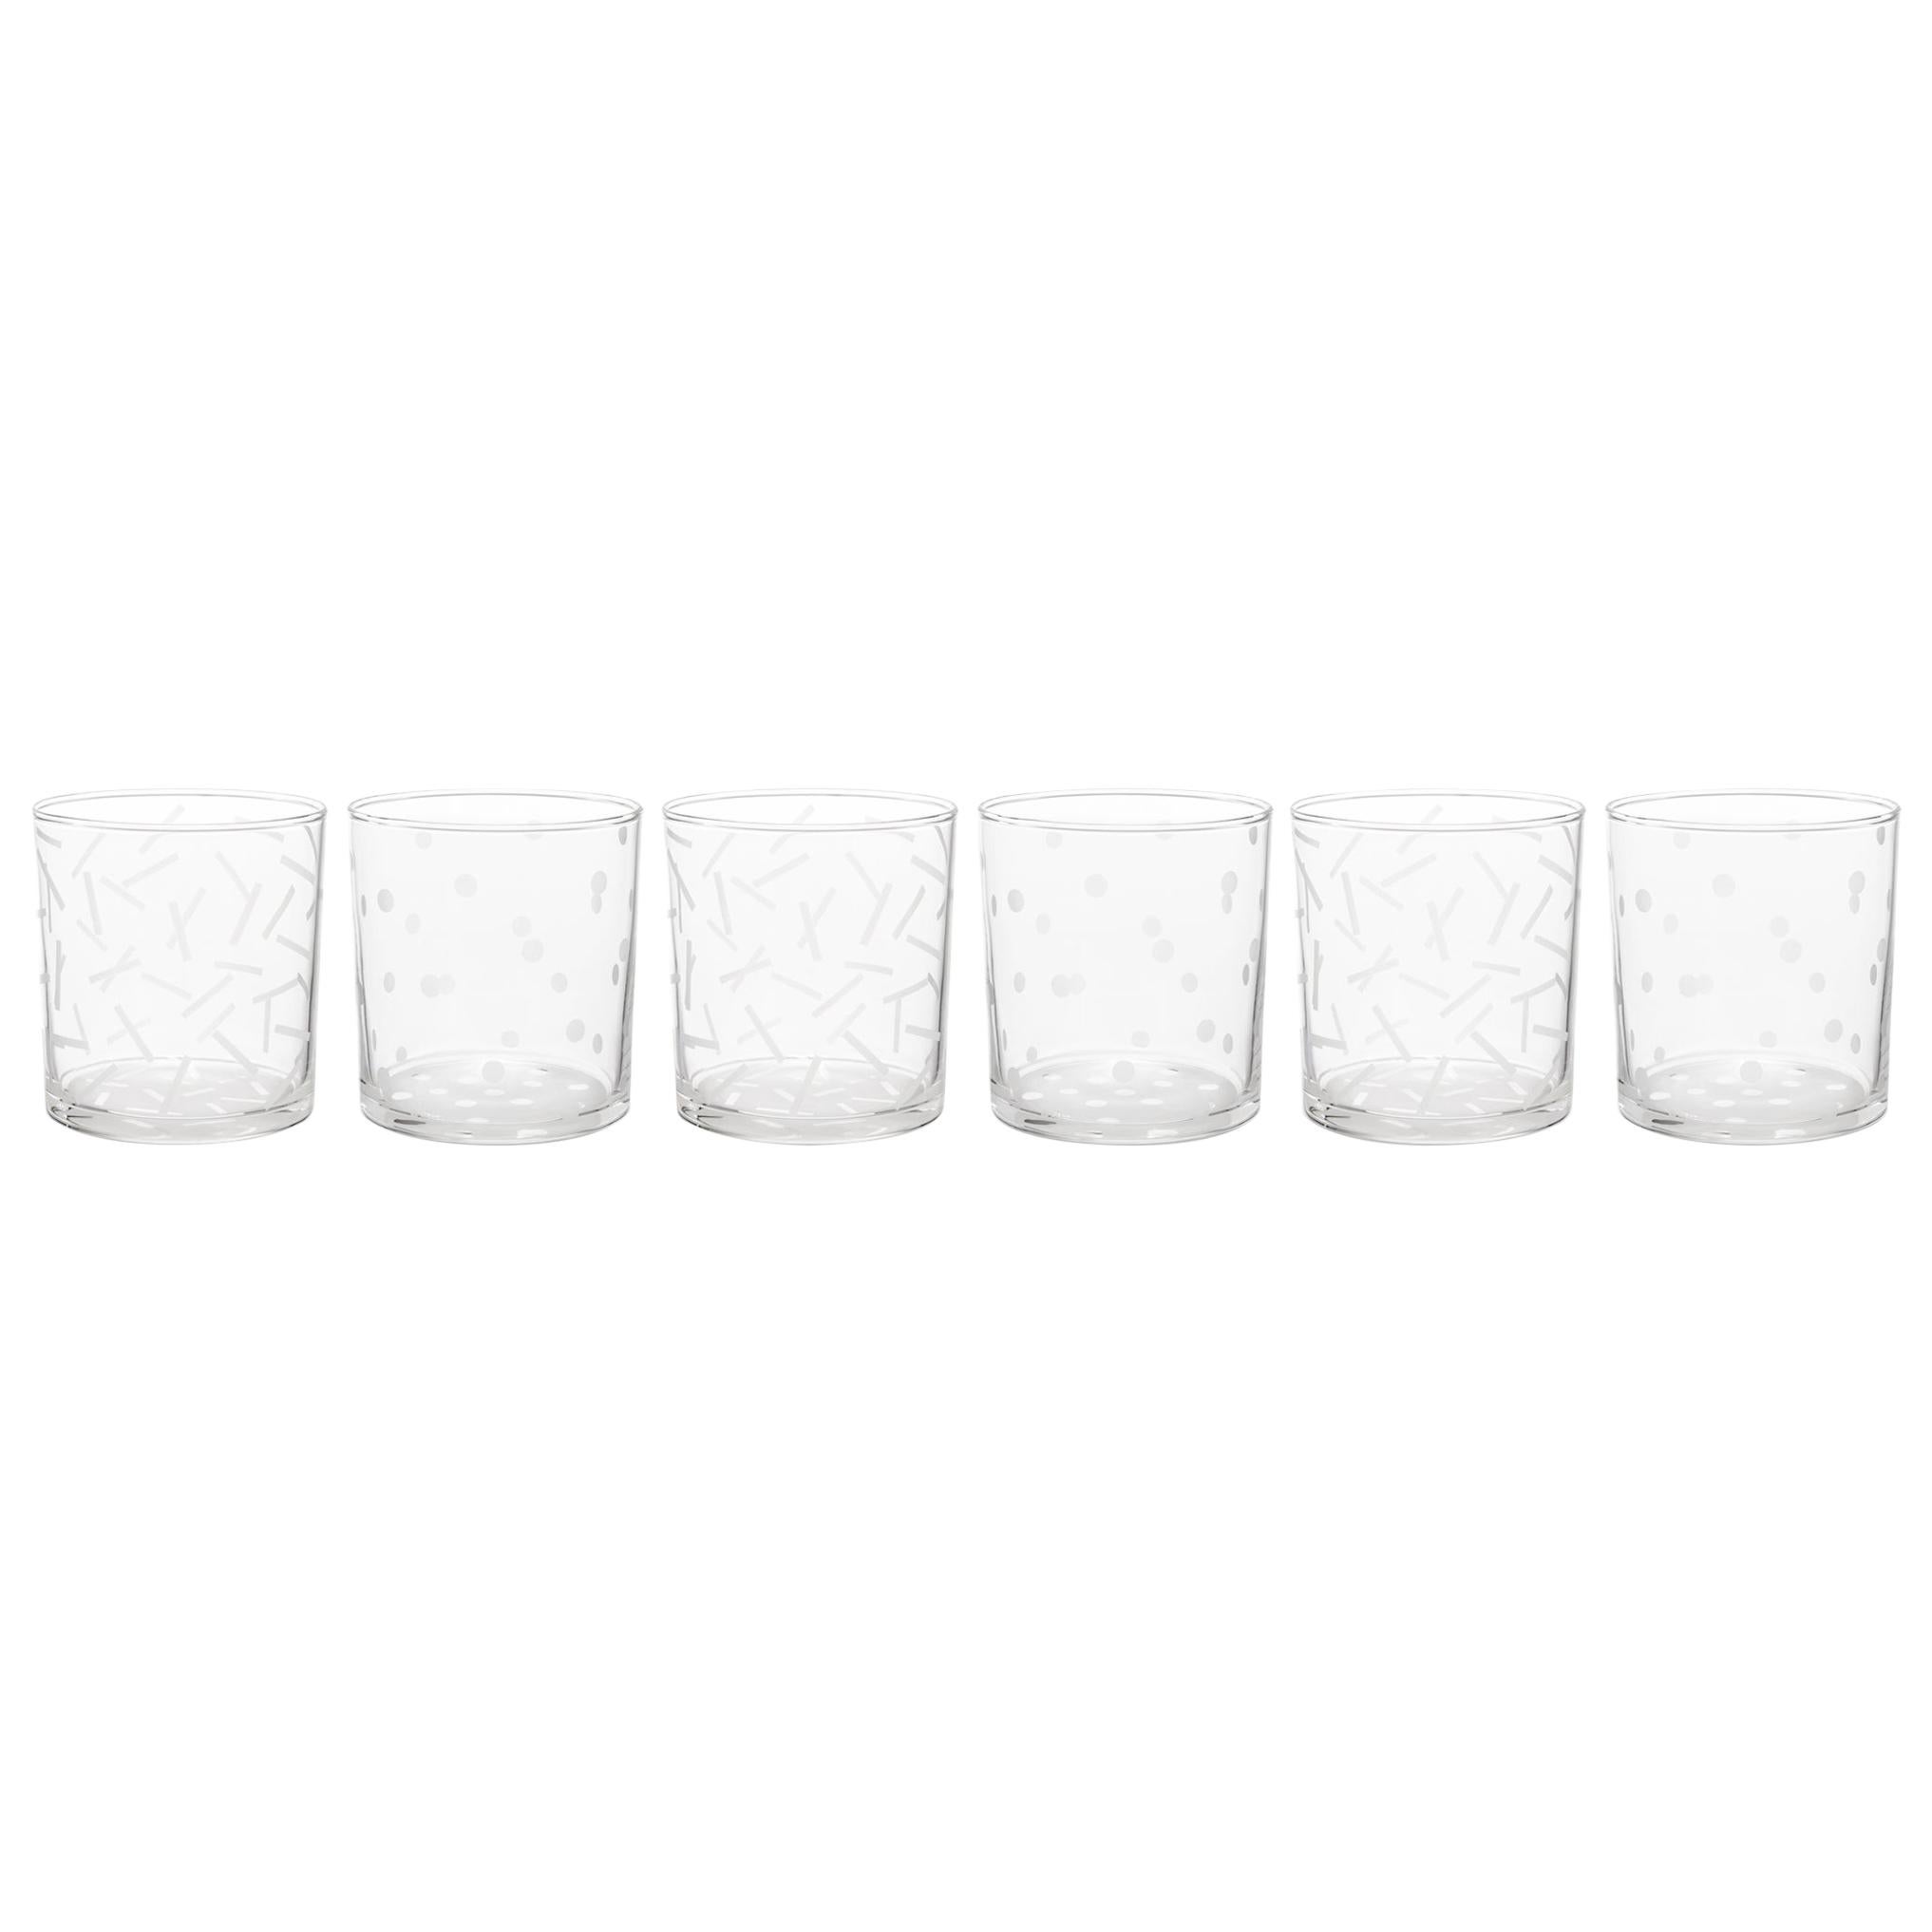 Dots and Dashes Glasses Set of 6 by Judy Smilow